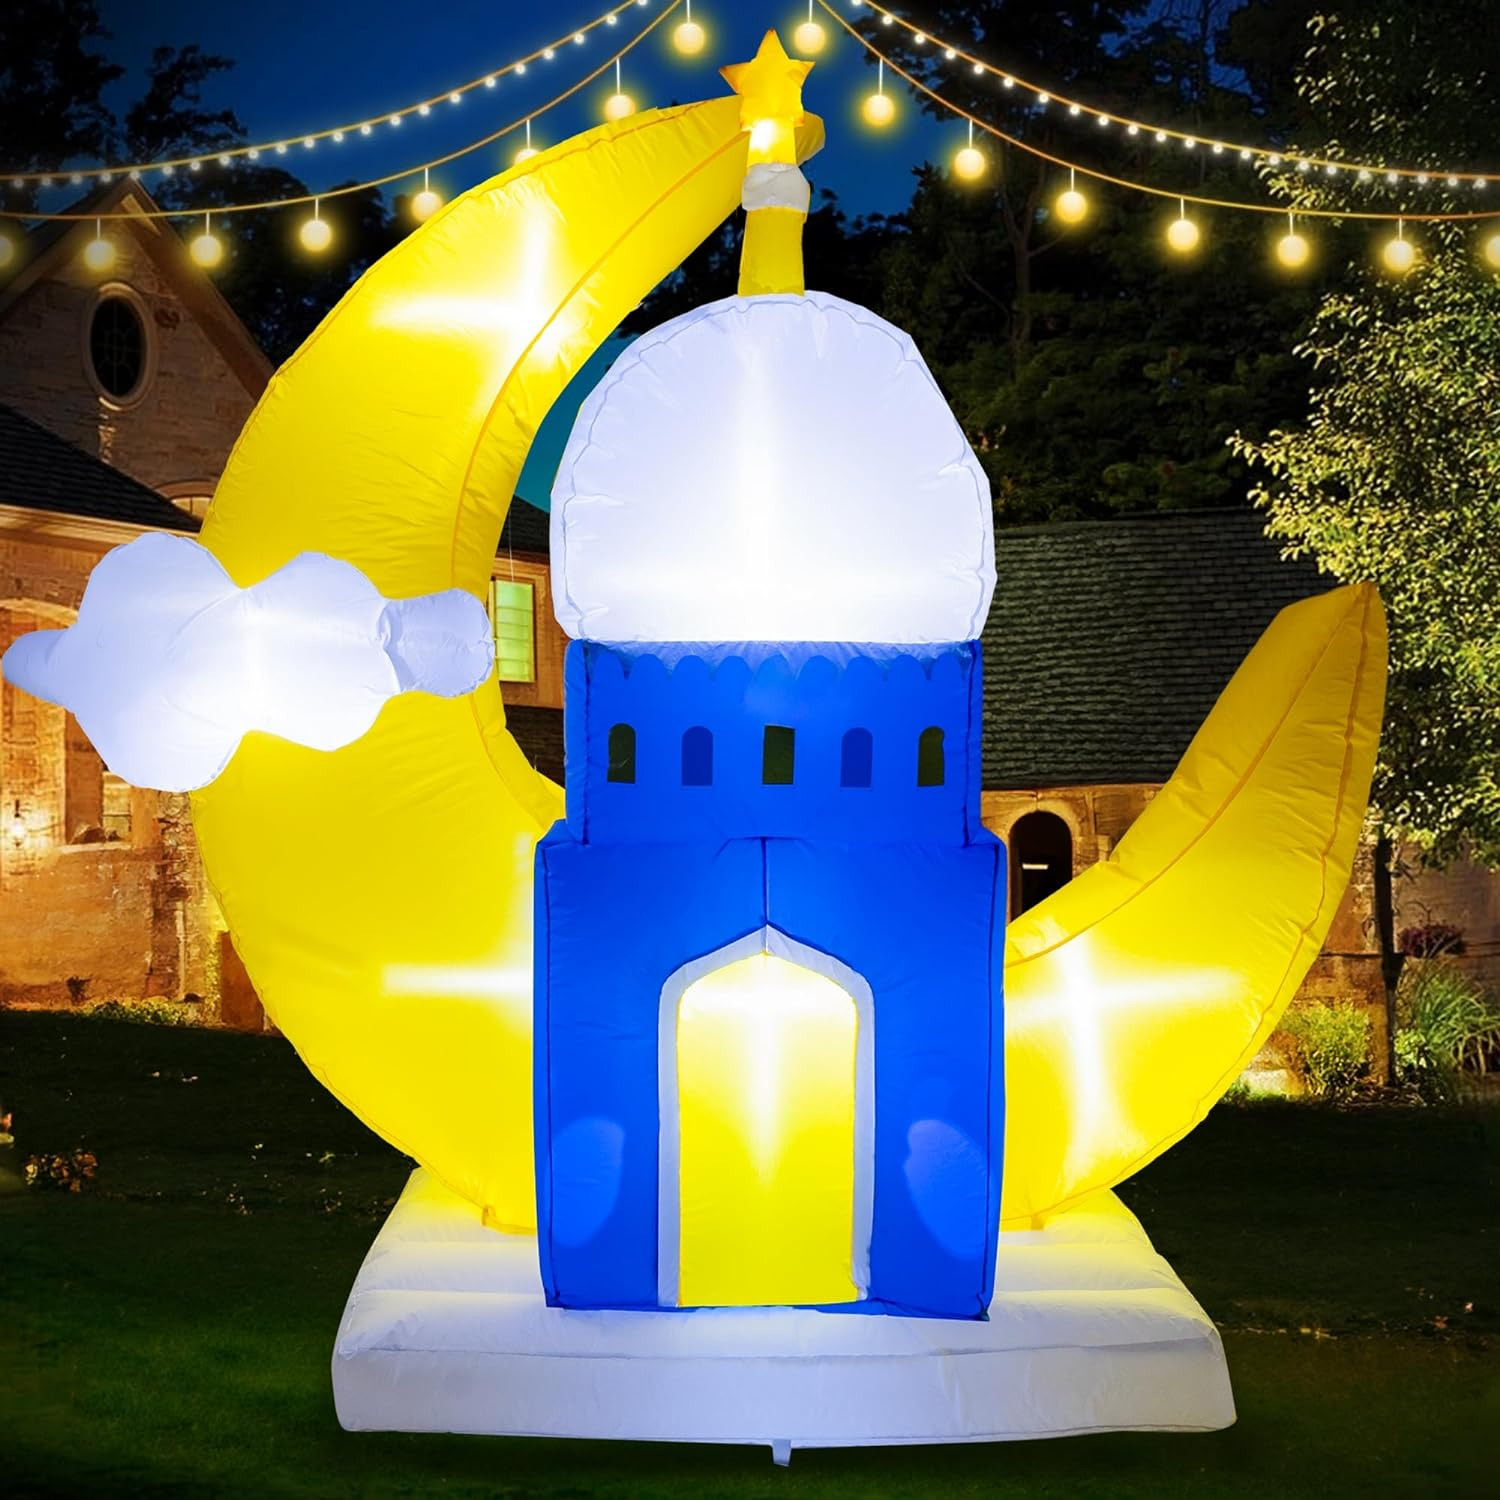 6 FT Ramadan Inflatable, Moon Castle Eid Outdoor Decorations, Blow up Muslim Hol